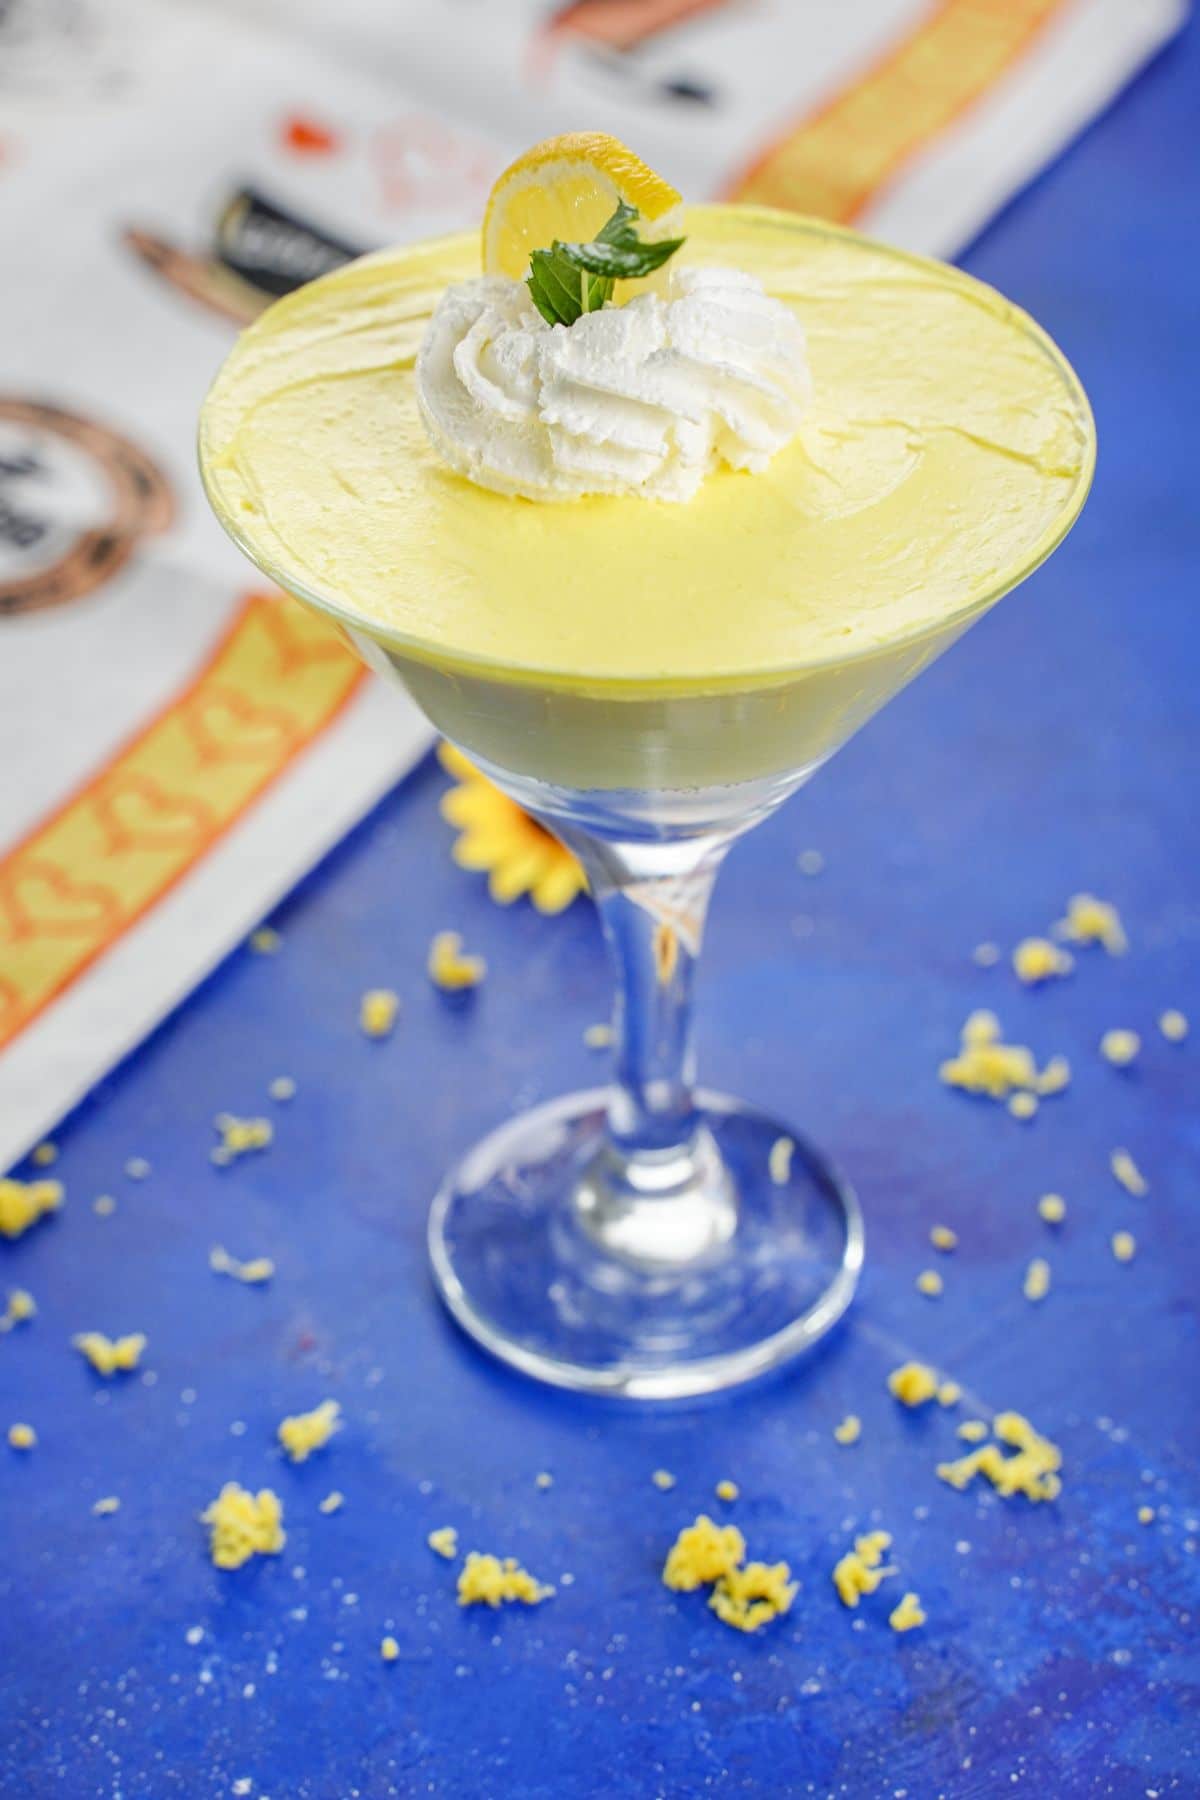 Creamy Lemon Cheesecake Mousse Served with some lemon leaves